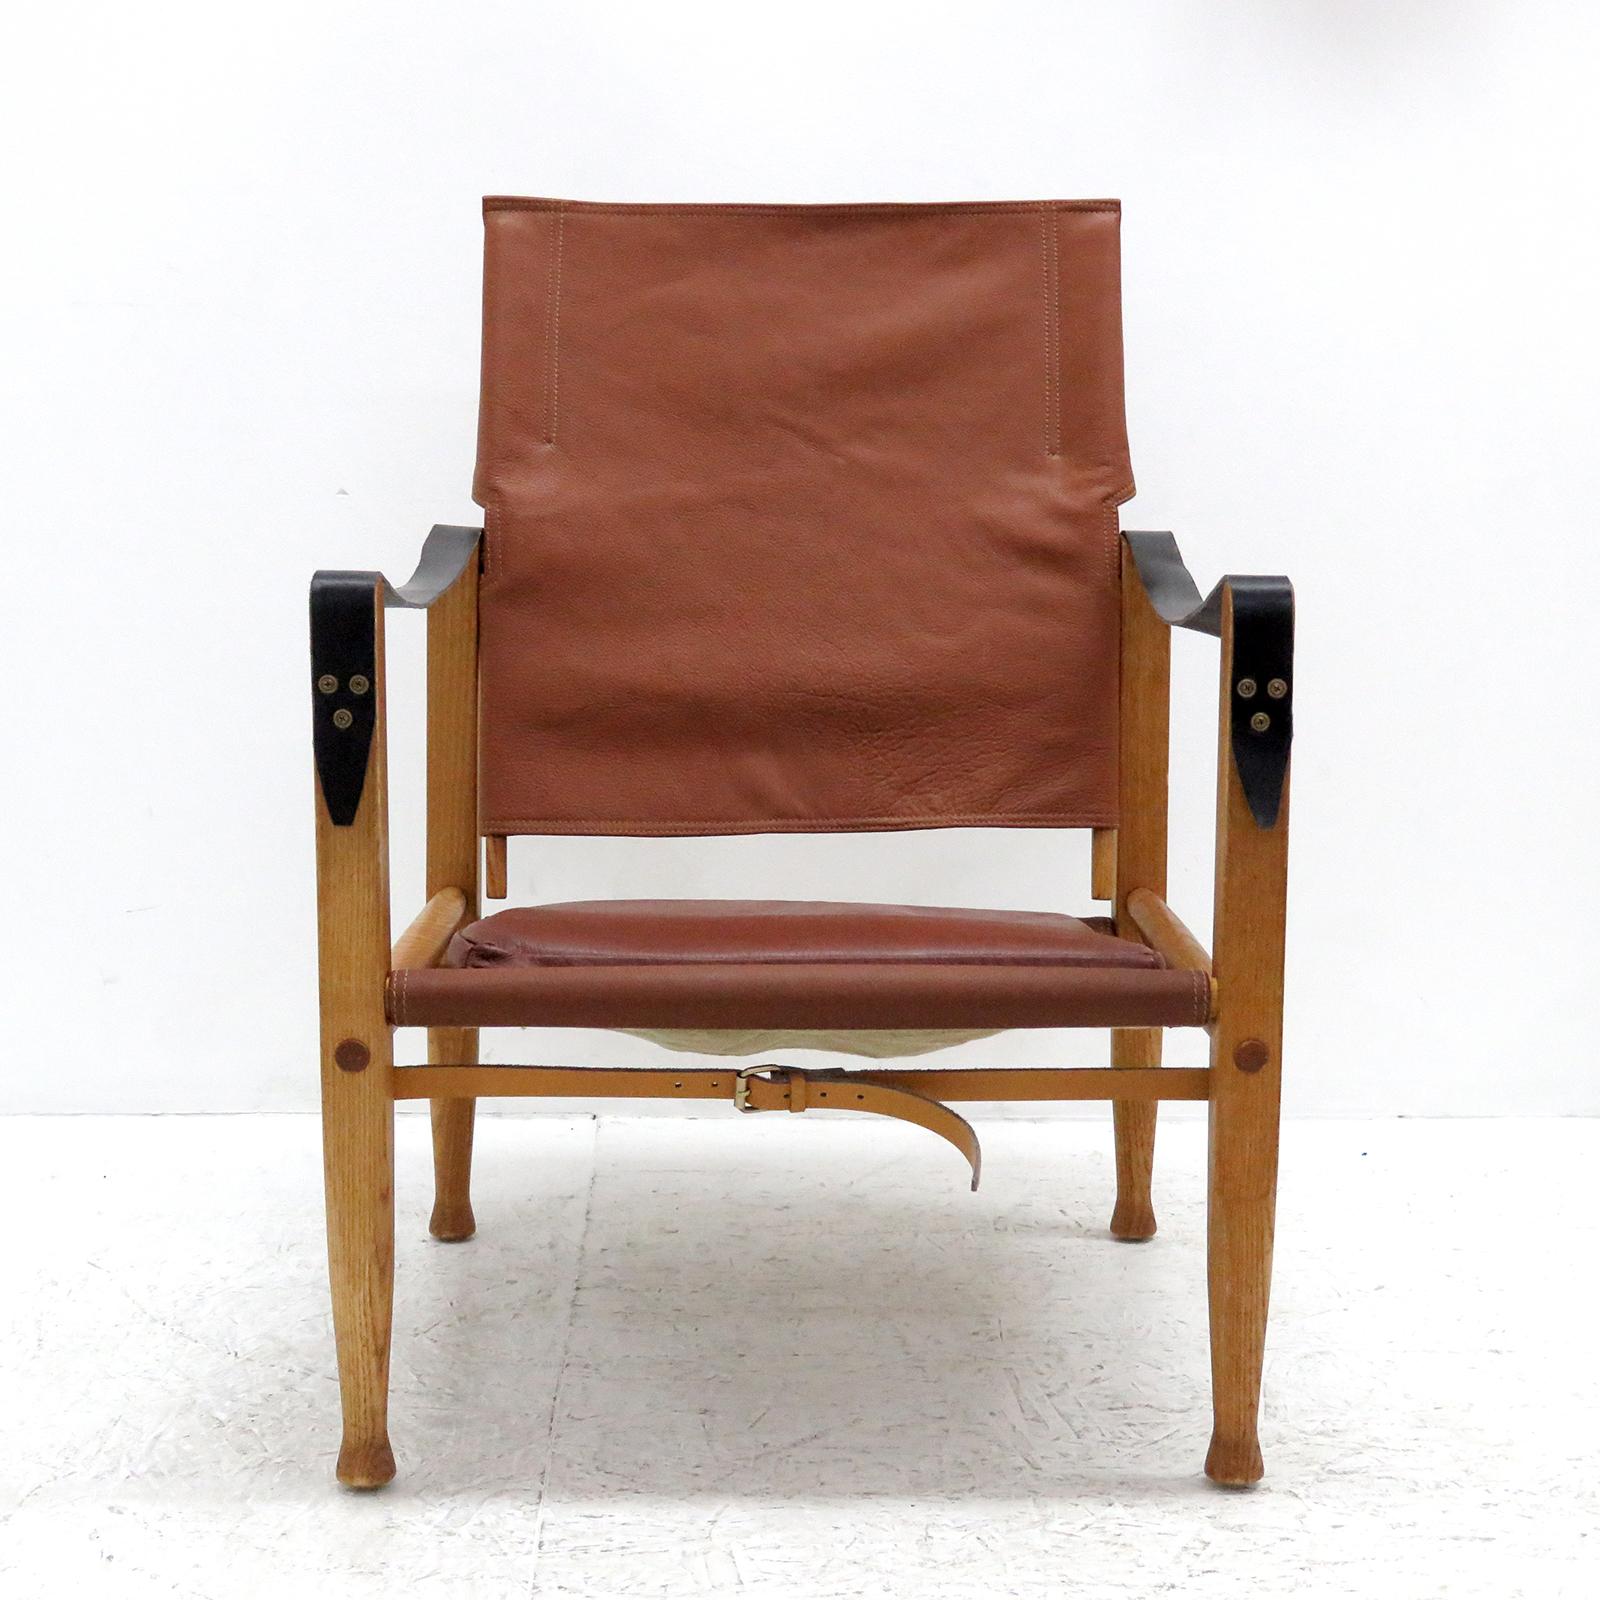 Stunning safari chair designed by Kaare Klint for Rud. Rasmussen’s Snedkerier, with patinated ash frame, seat, back, straps and loose cushion in leather, designed in 1933, produced 1969, reupholstered in slightly varying shades of cognac to burgundy